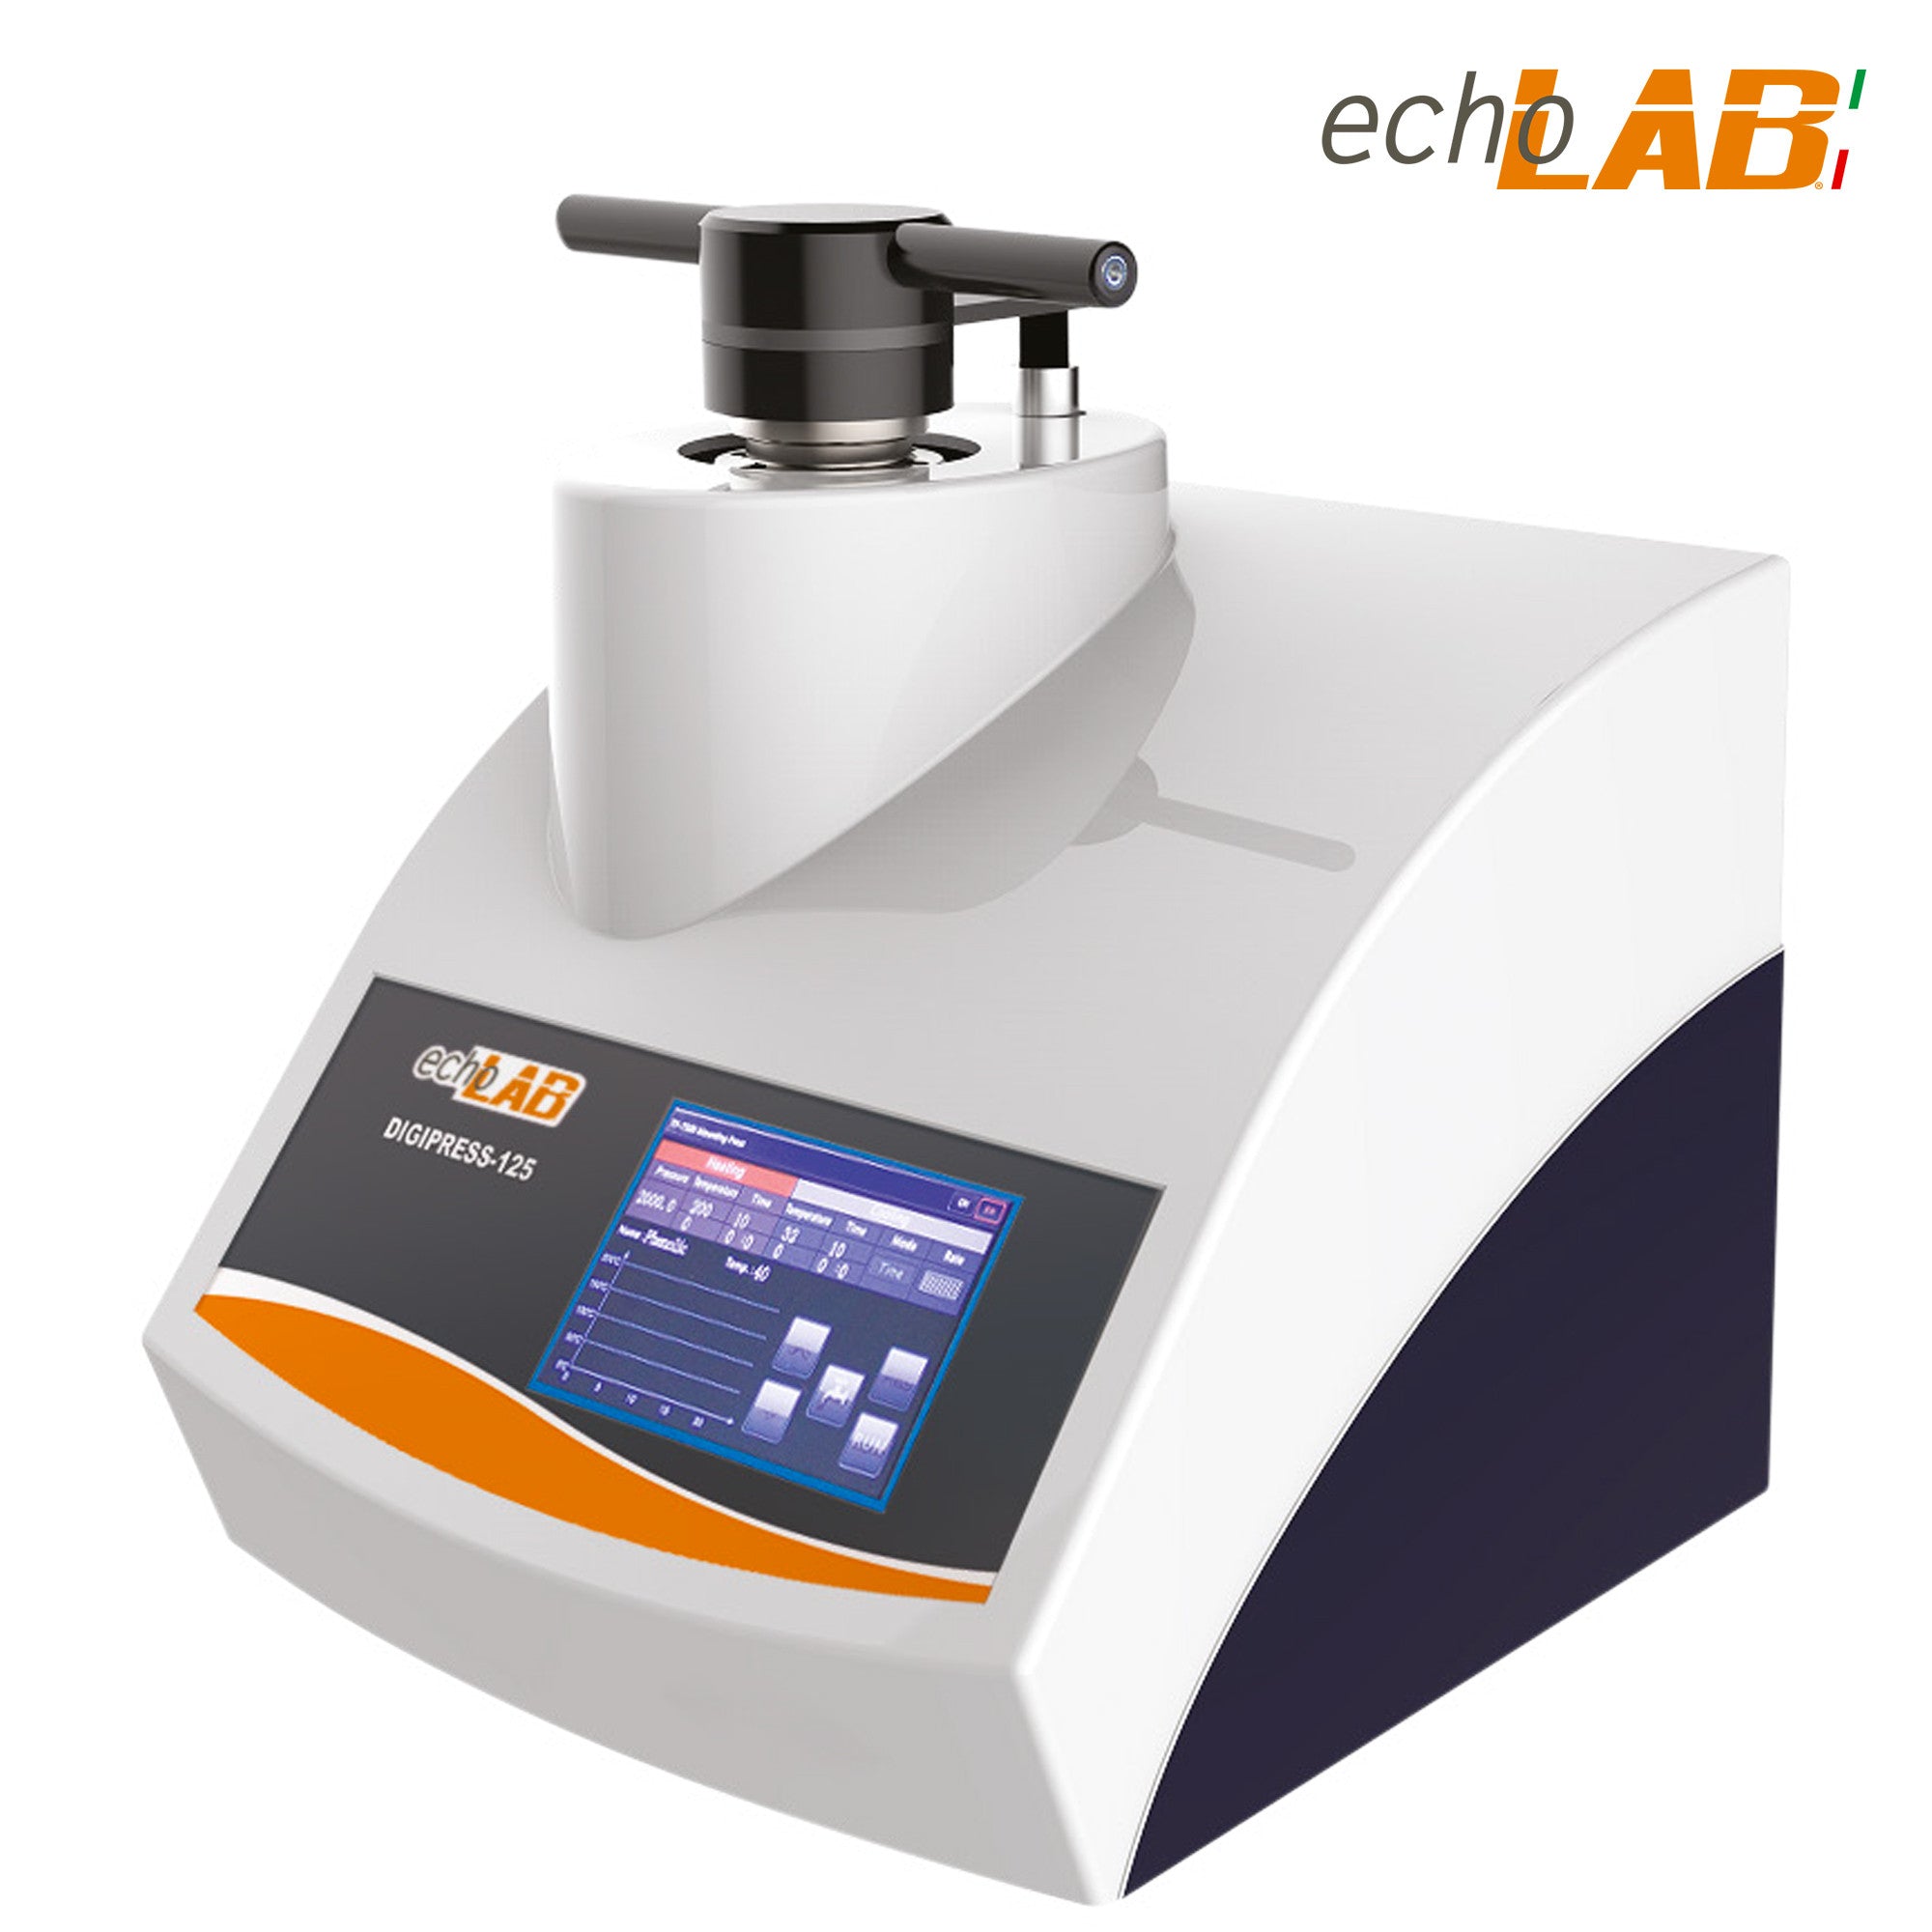 Fully automatic mounting press different mold sizes from  25 to 50mm 4 mounting operations - echoLAB